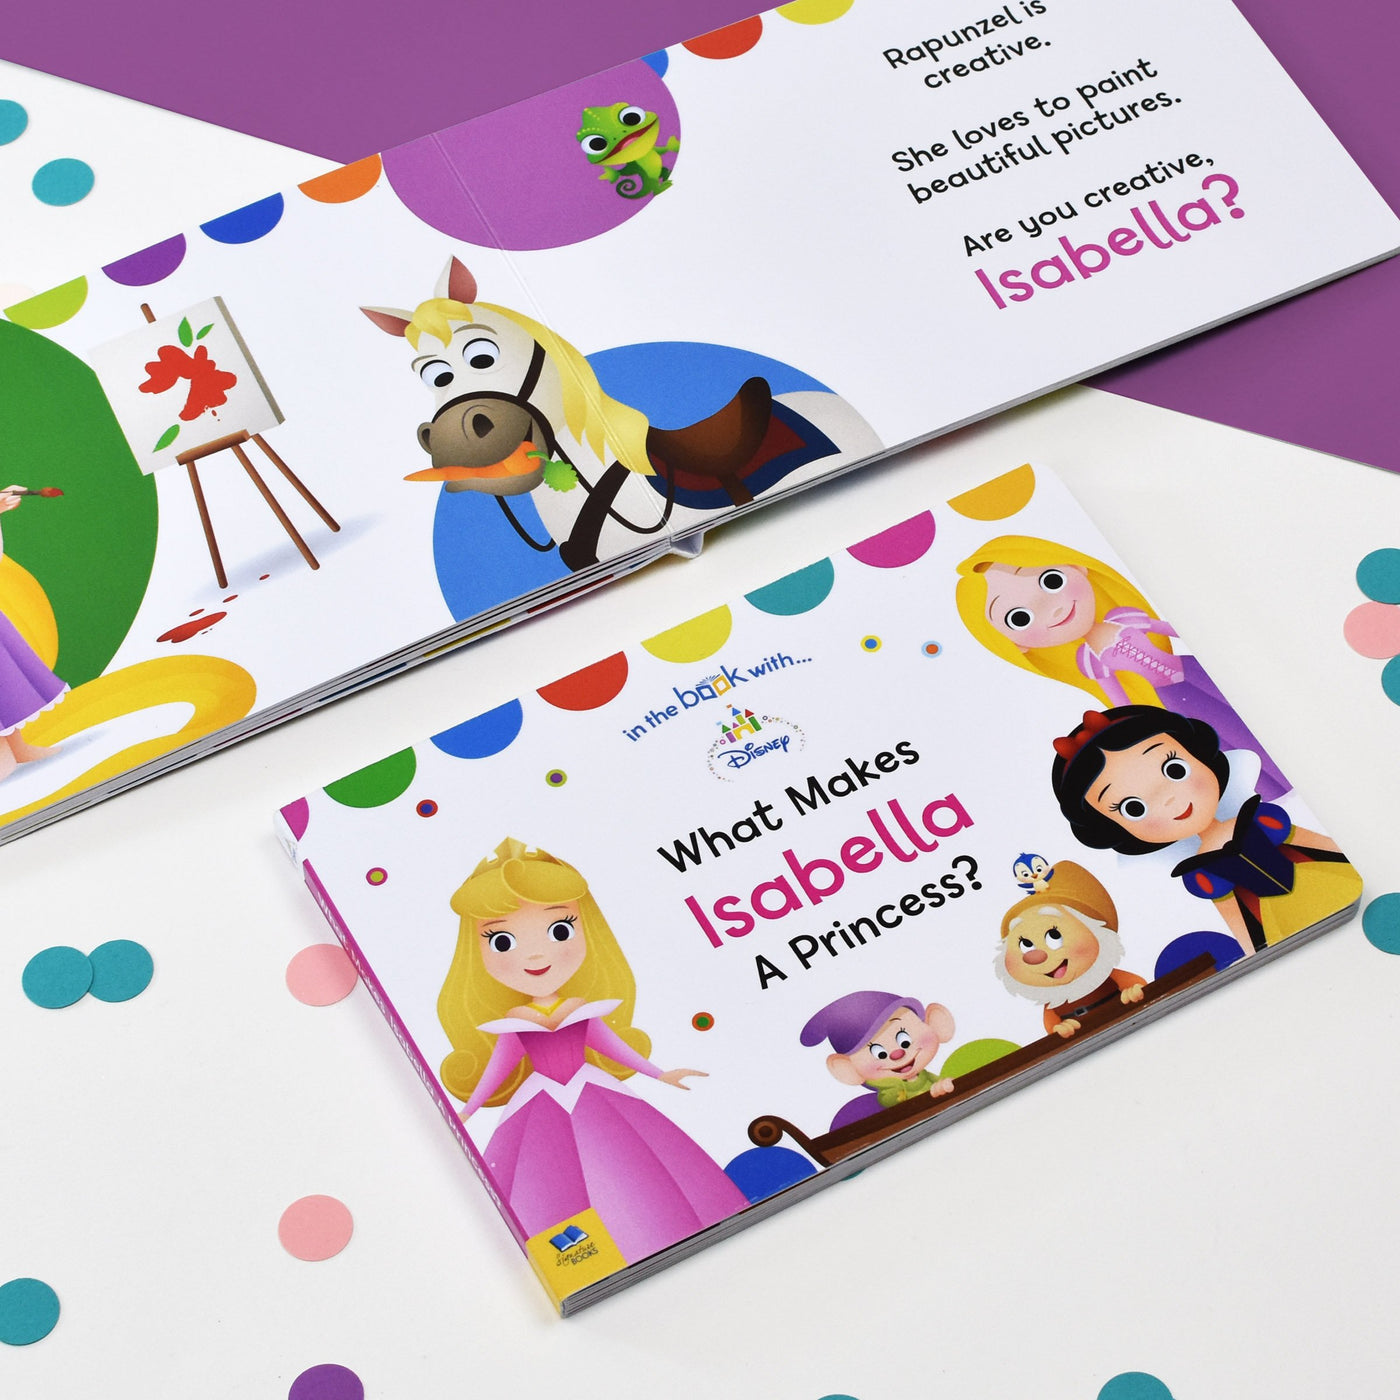 What Makes me a Princess Disney Board Book - Shop Personalised Gifts